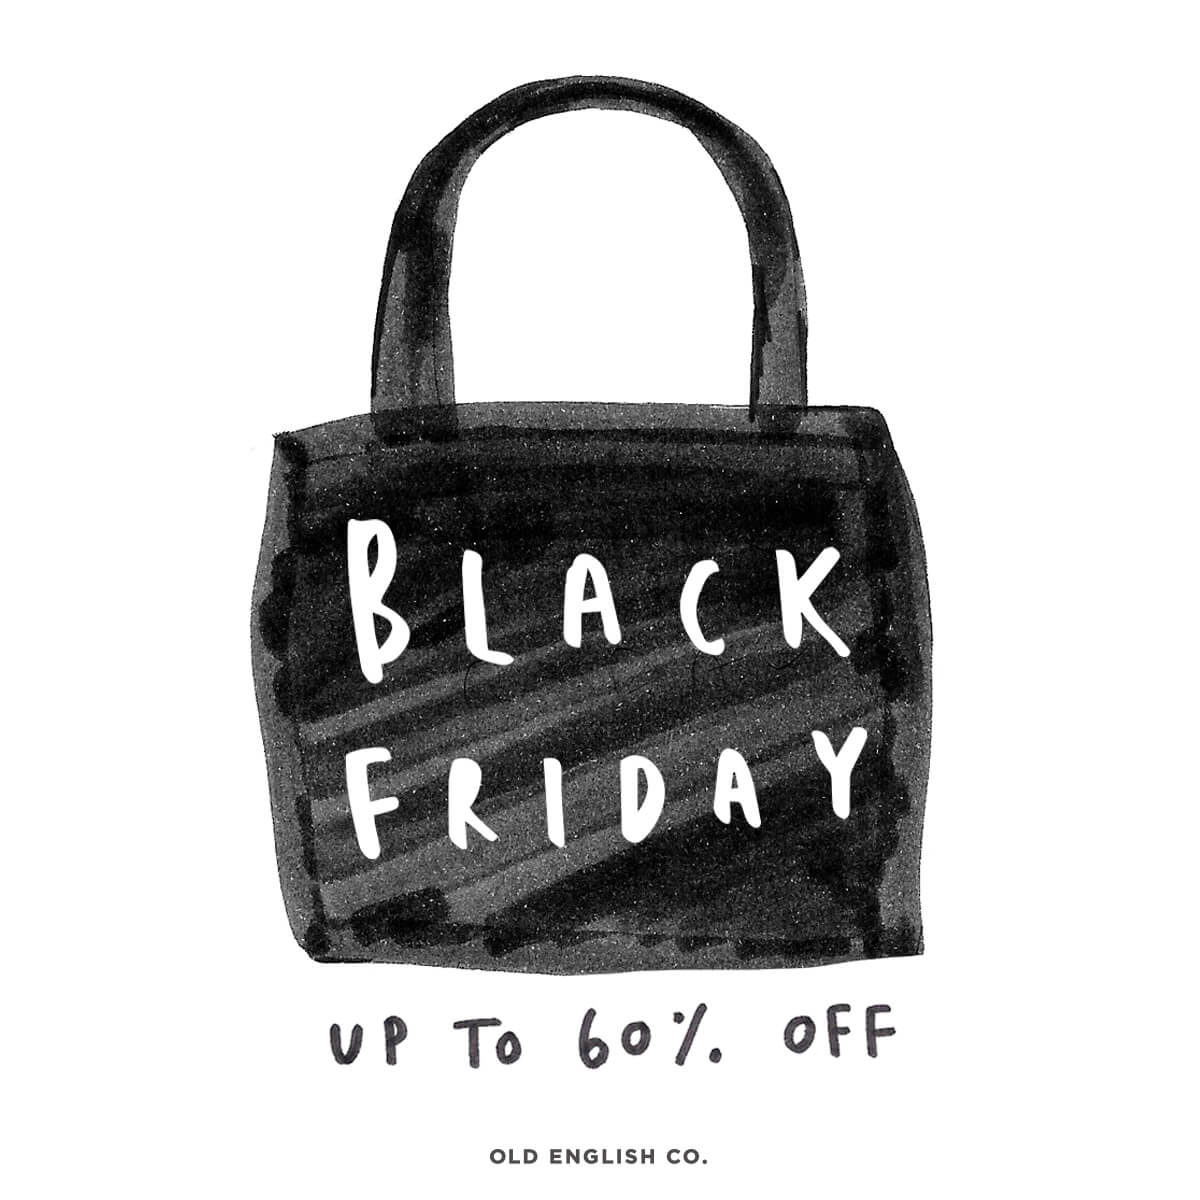 Black Friday up to 60% off